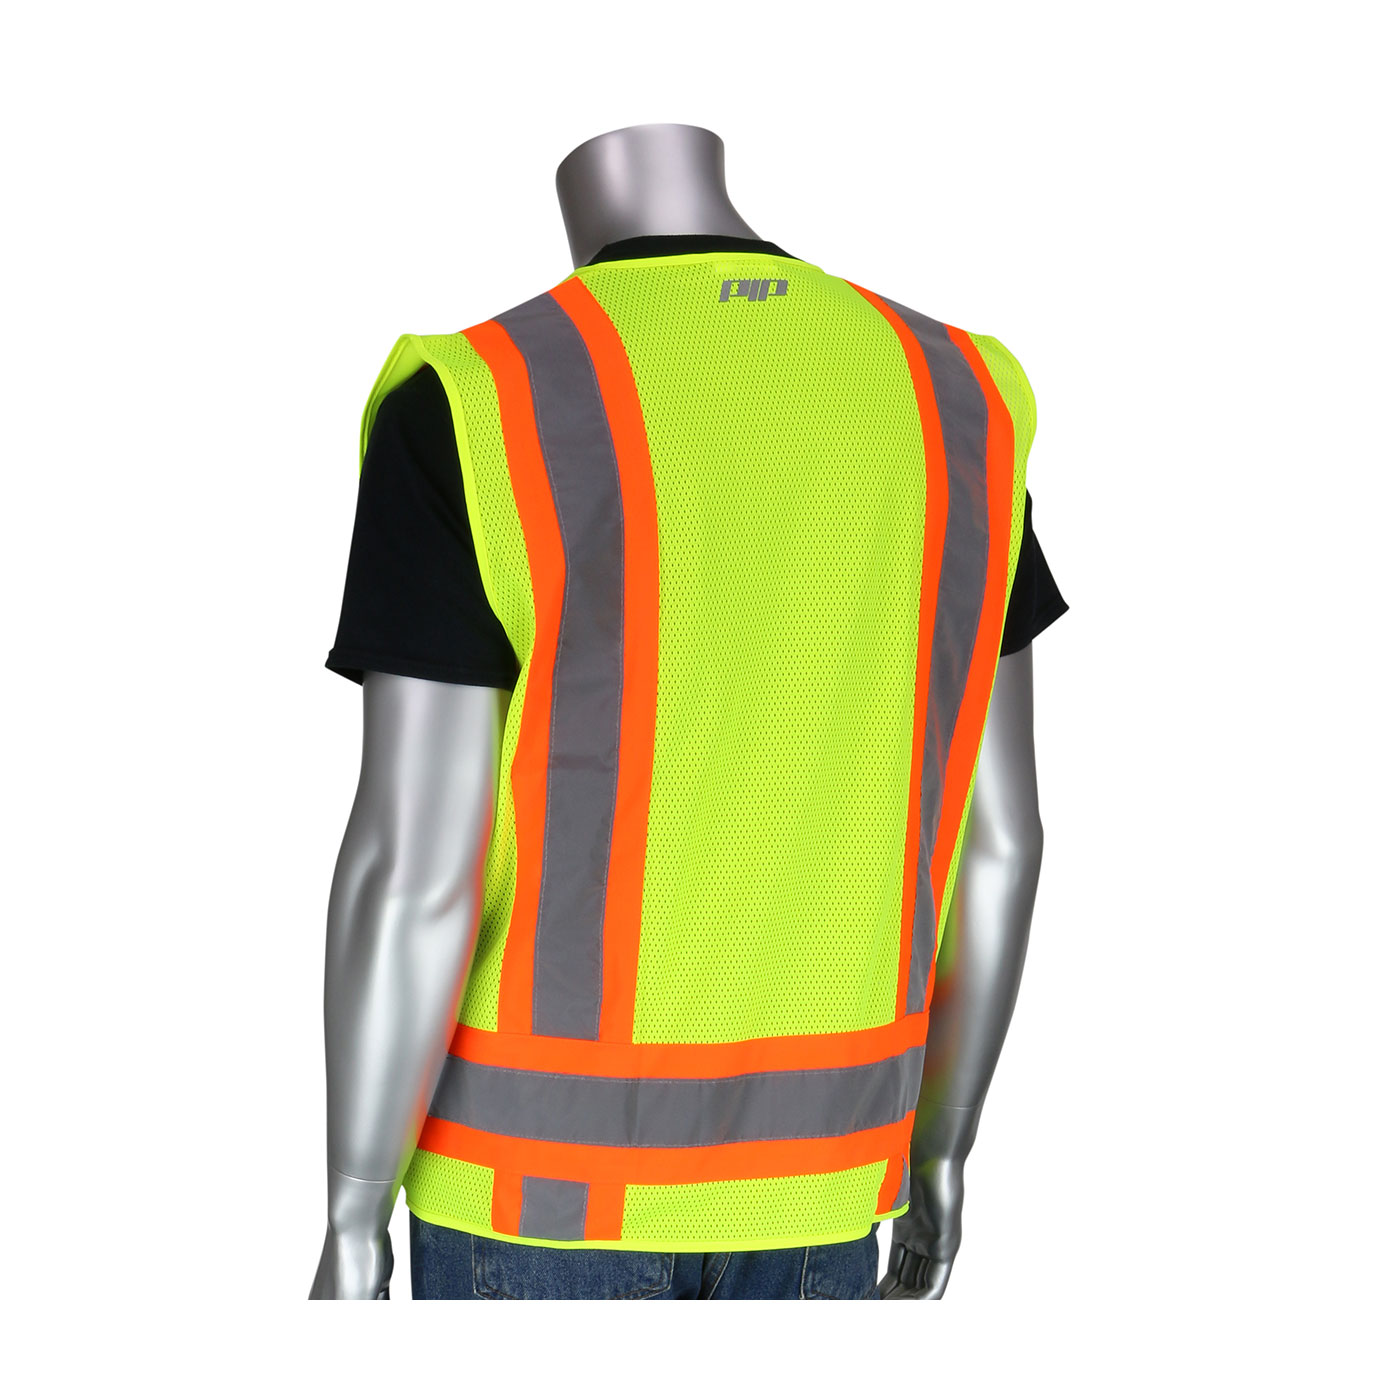 PIP® ANSI Type R Class 2 Two-Tone Eleven Pocket Surveyors Vest with Solid Front and Mesh Back #302-0500-YEL